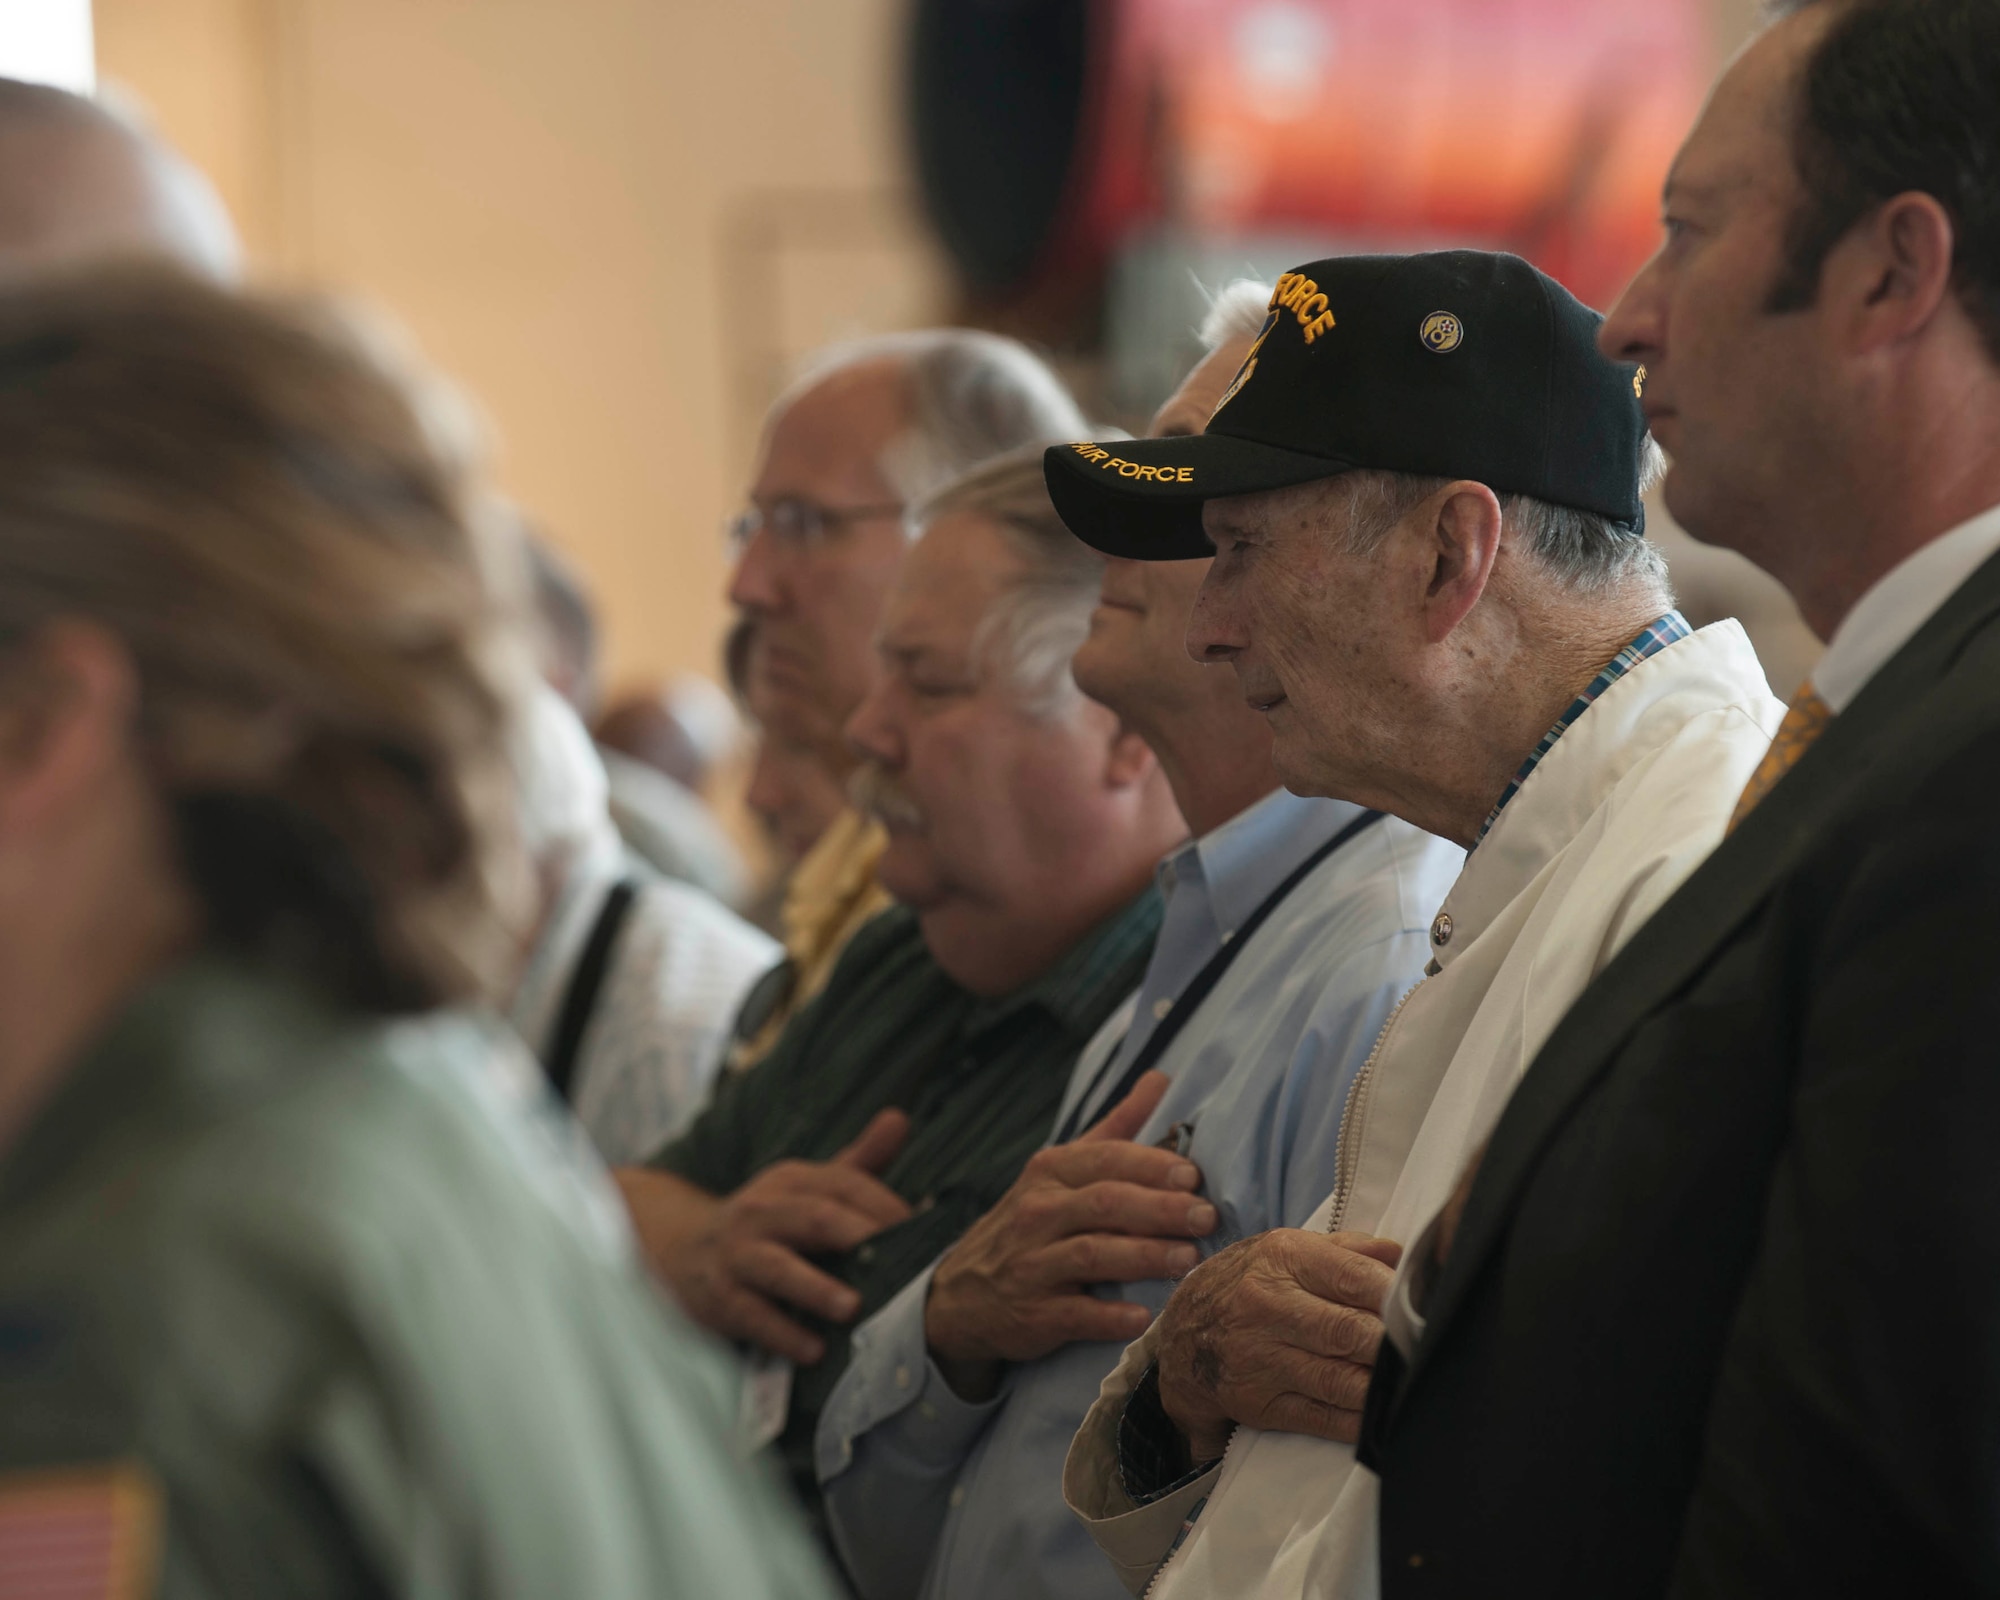 Former 489th Bombardment Group members place their hands over their hearts for the playing of the national anthem during the 489th Bomb Group reactivation ceremony Oct. 17, 2015, at Dyess Air Force Base, Texas. The 489th BG supported the landings in Normandy and flew missions into Germany, bombing strategic targets and participating in food drops for Allied Forces in France. (U.S. Air Force photo by Airman Quay Drawdy/Released)
